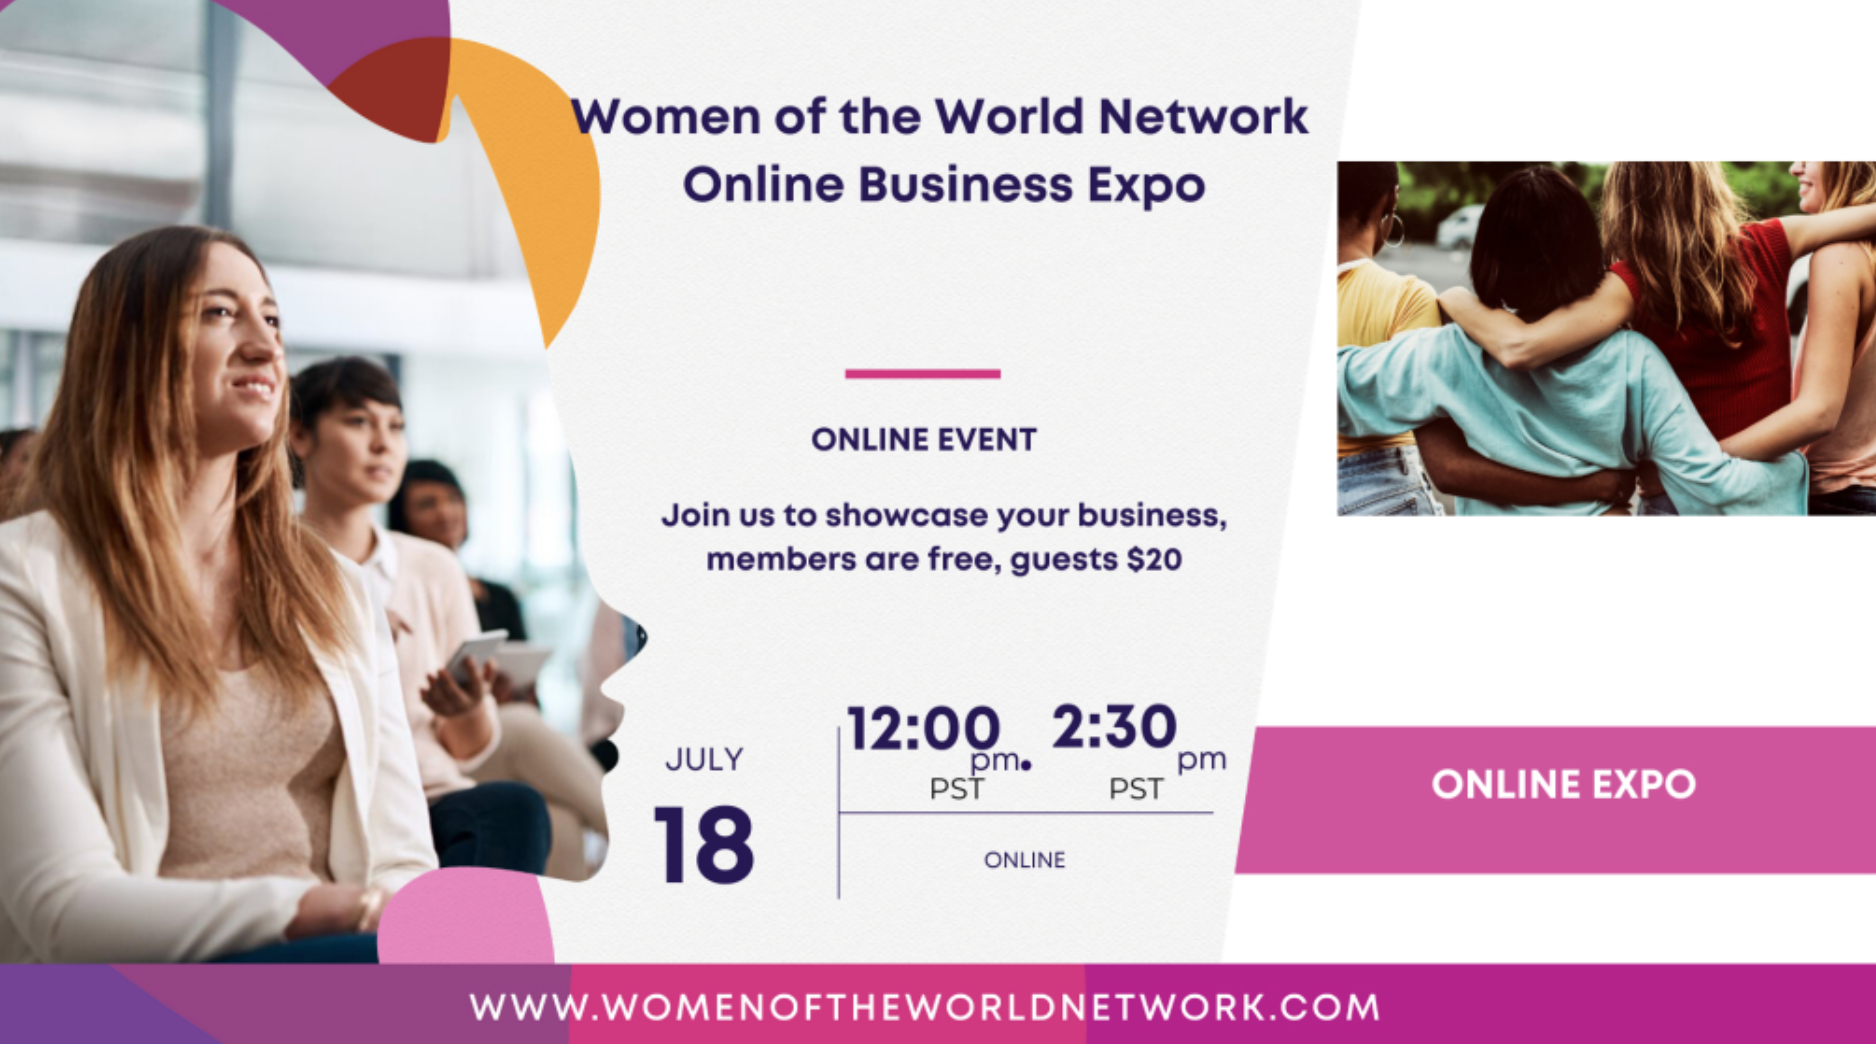 Women of the World Network Expo